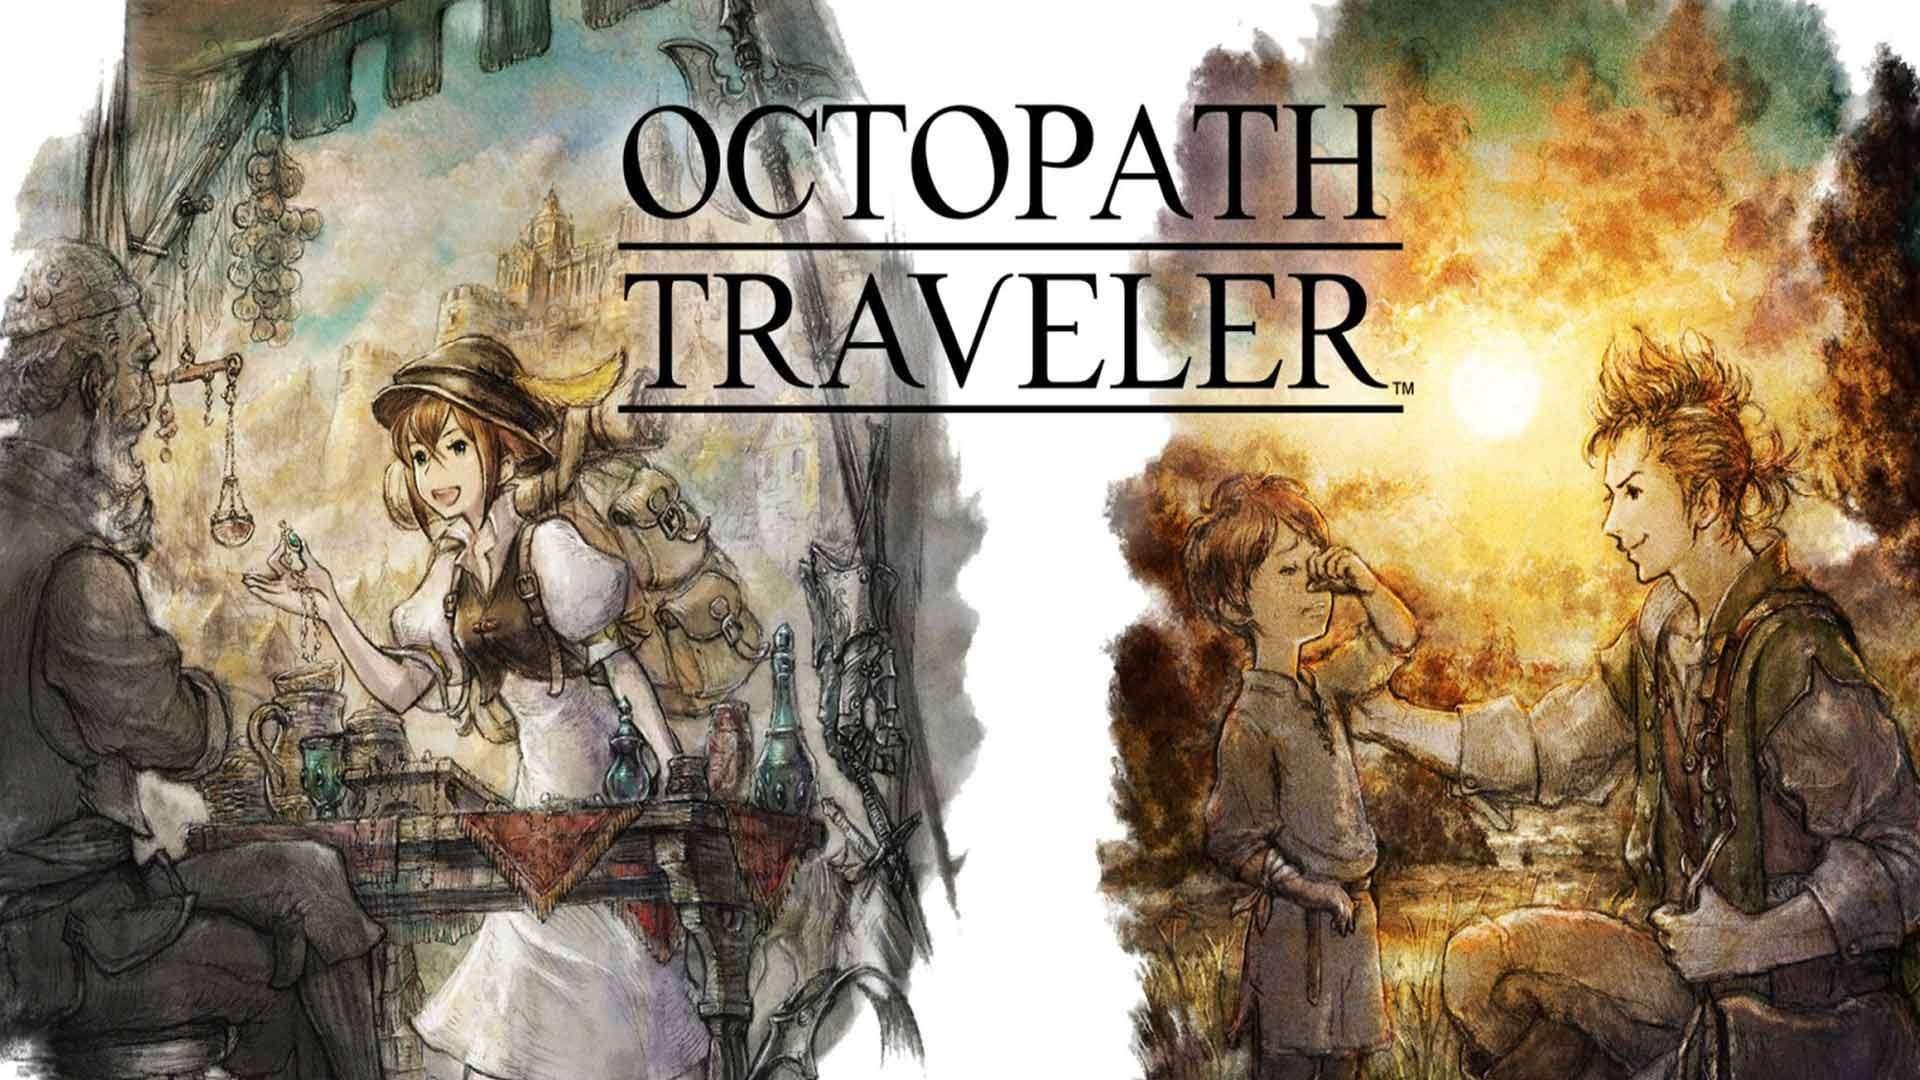 Final Protagonists For Octopath Traveler Revealed